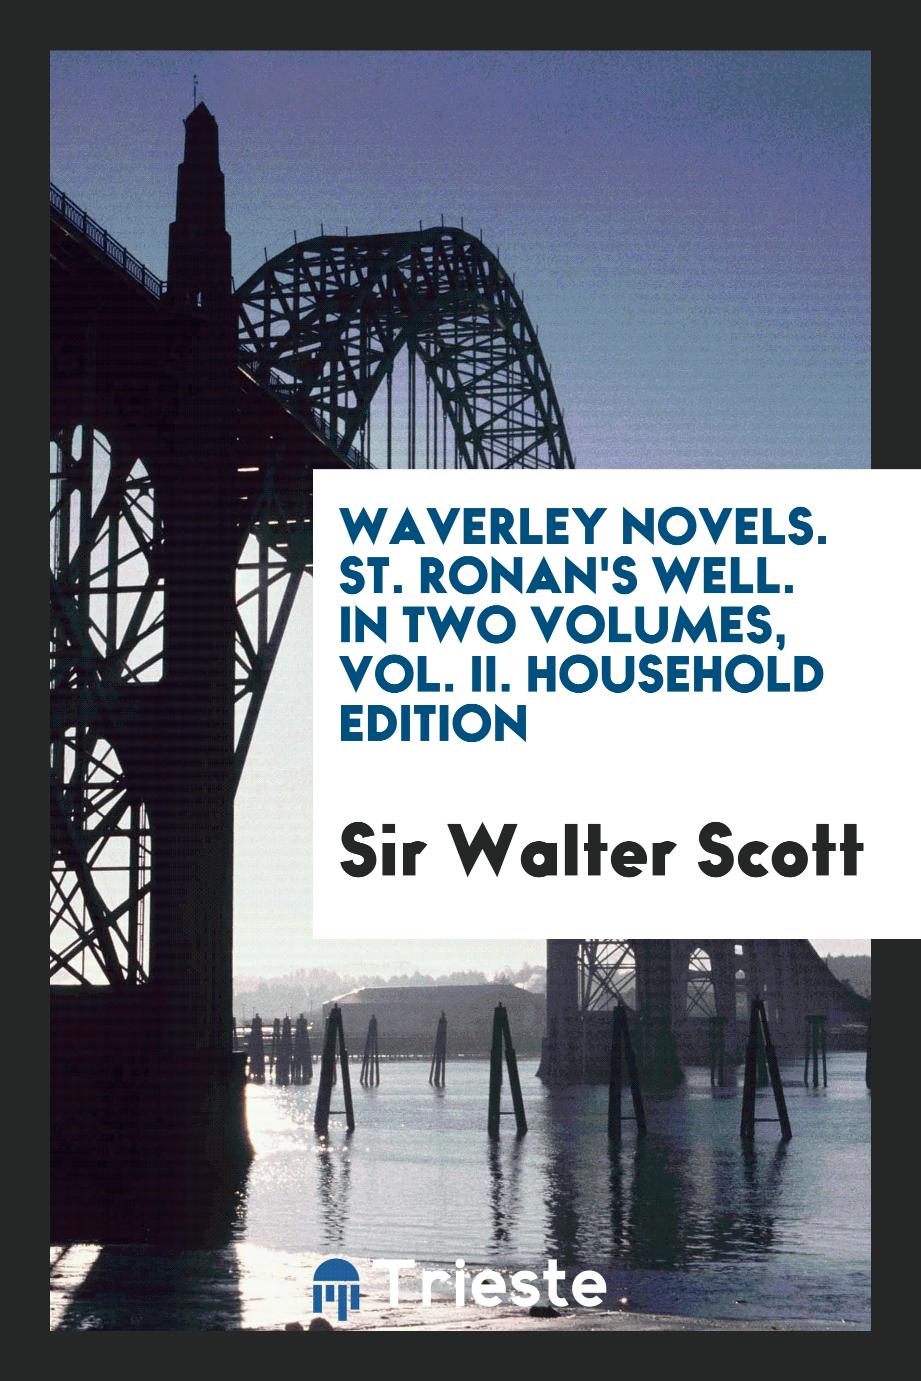 Waverley Novels. St. Ronan's Well. In Two Volumes, Vol. II. Household Edition